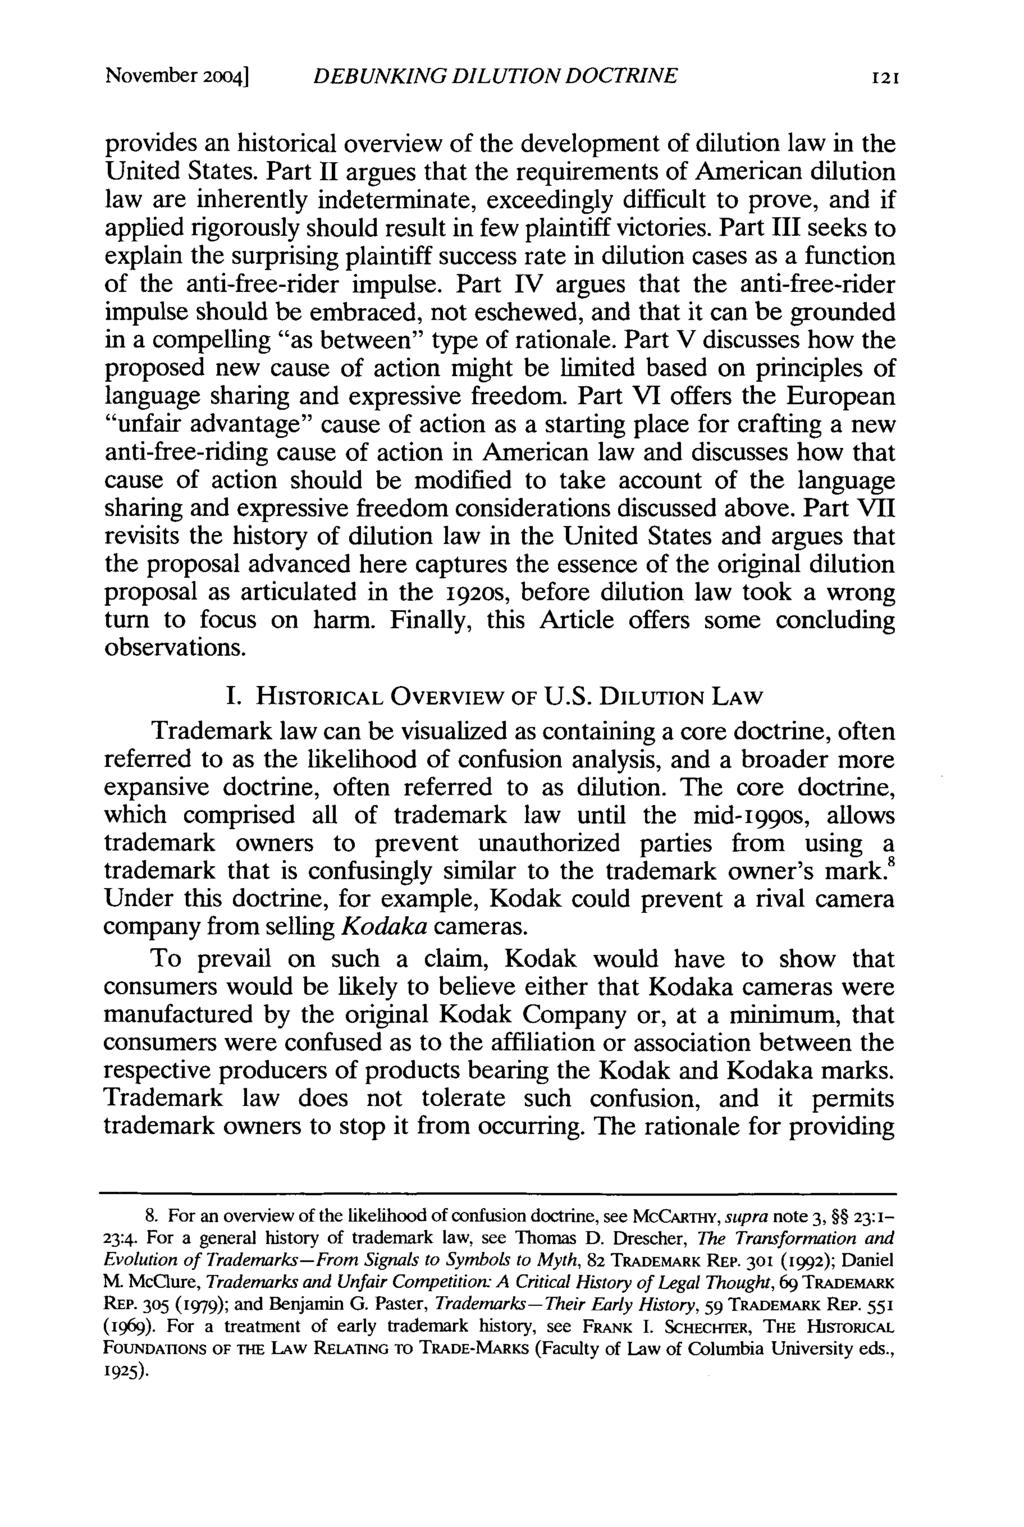 November 2004] DEBUNKING DILUTION DOCTRINE 121 provides an historical overview of the development of dilution law in the United States.